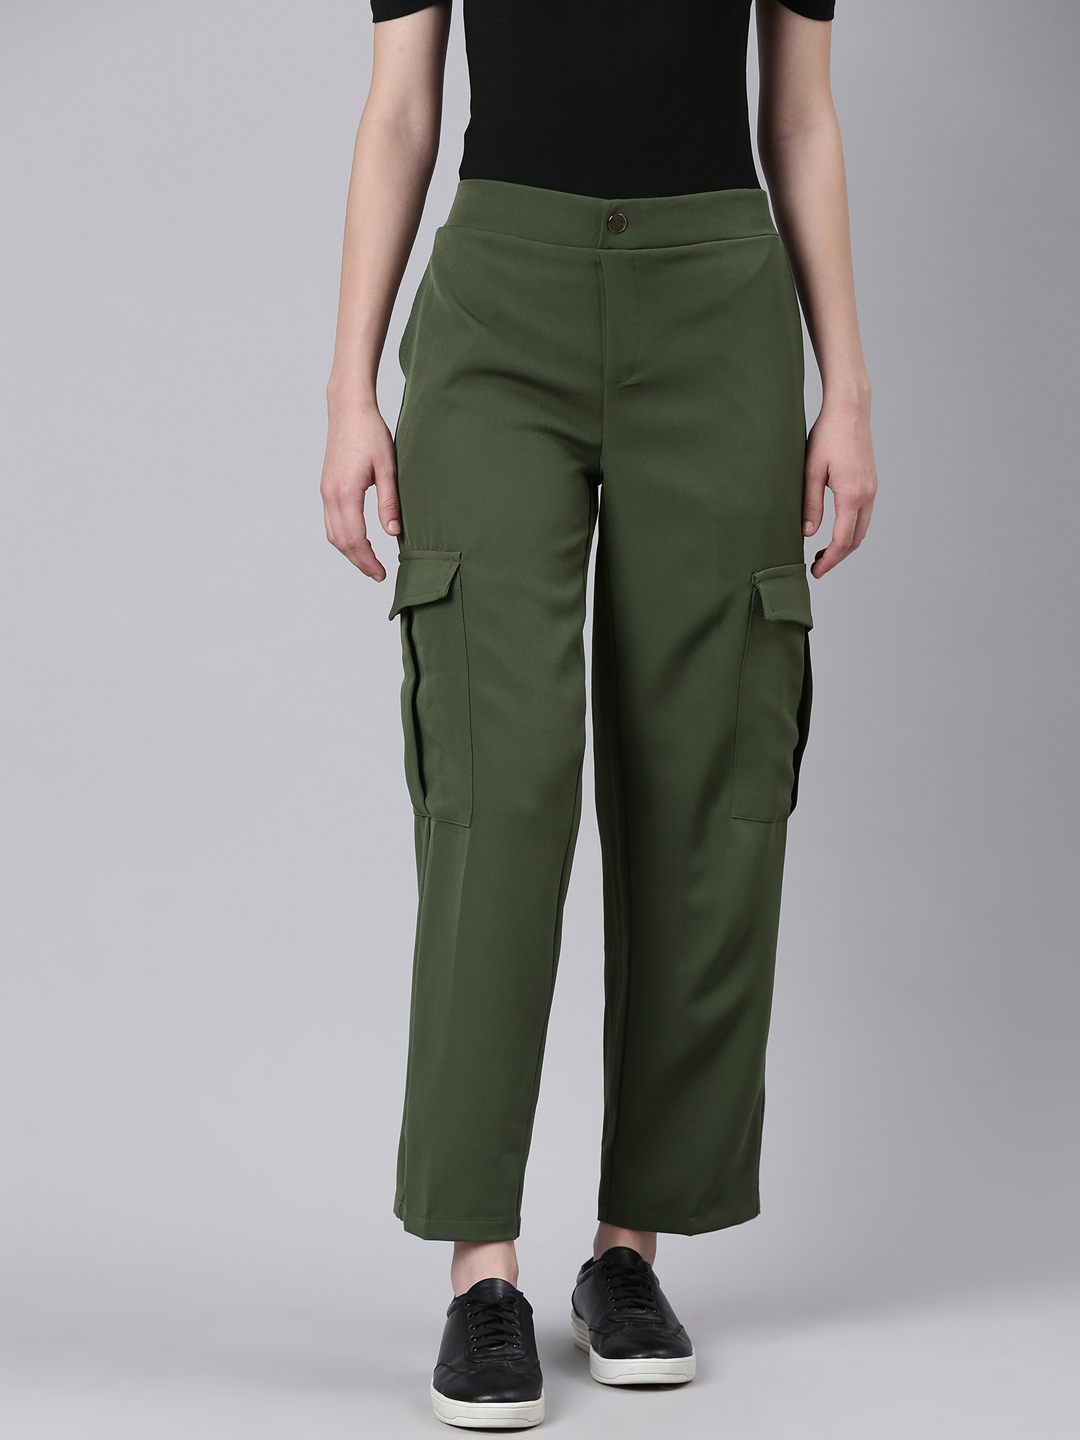 Buy The Label Life Women Olive Green Solid Cargos Trousers - Trousers for  Women 20404736 | Myntra